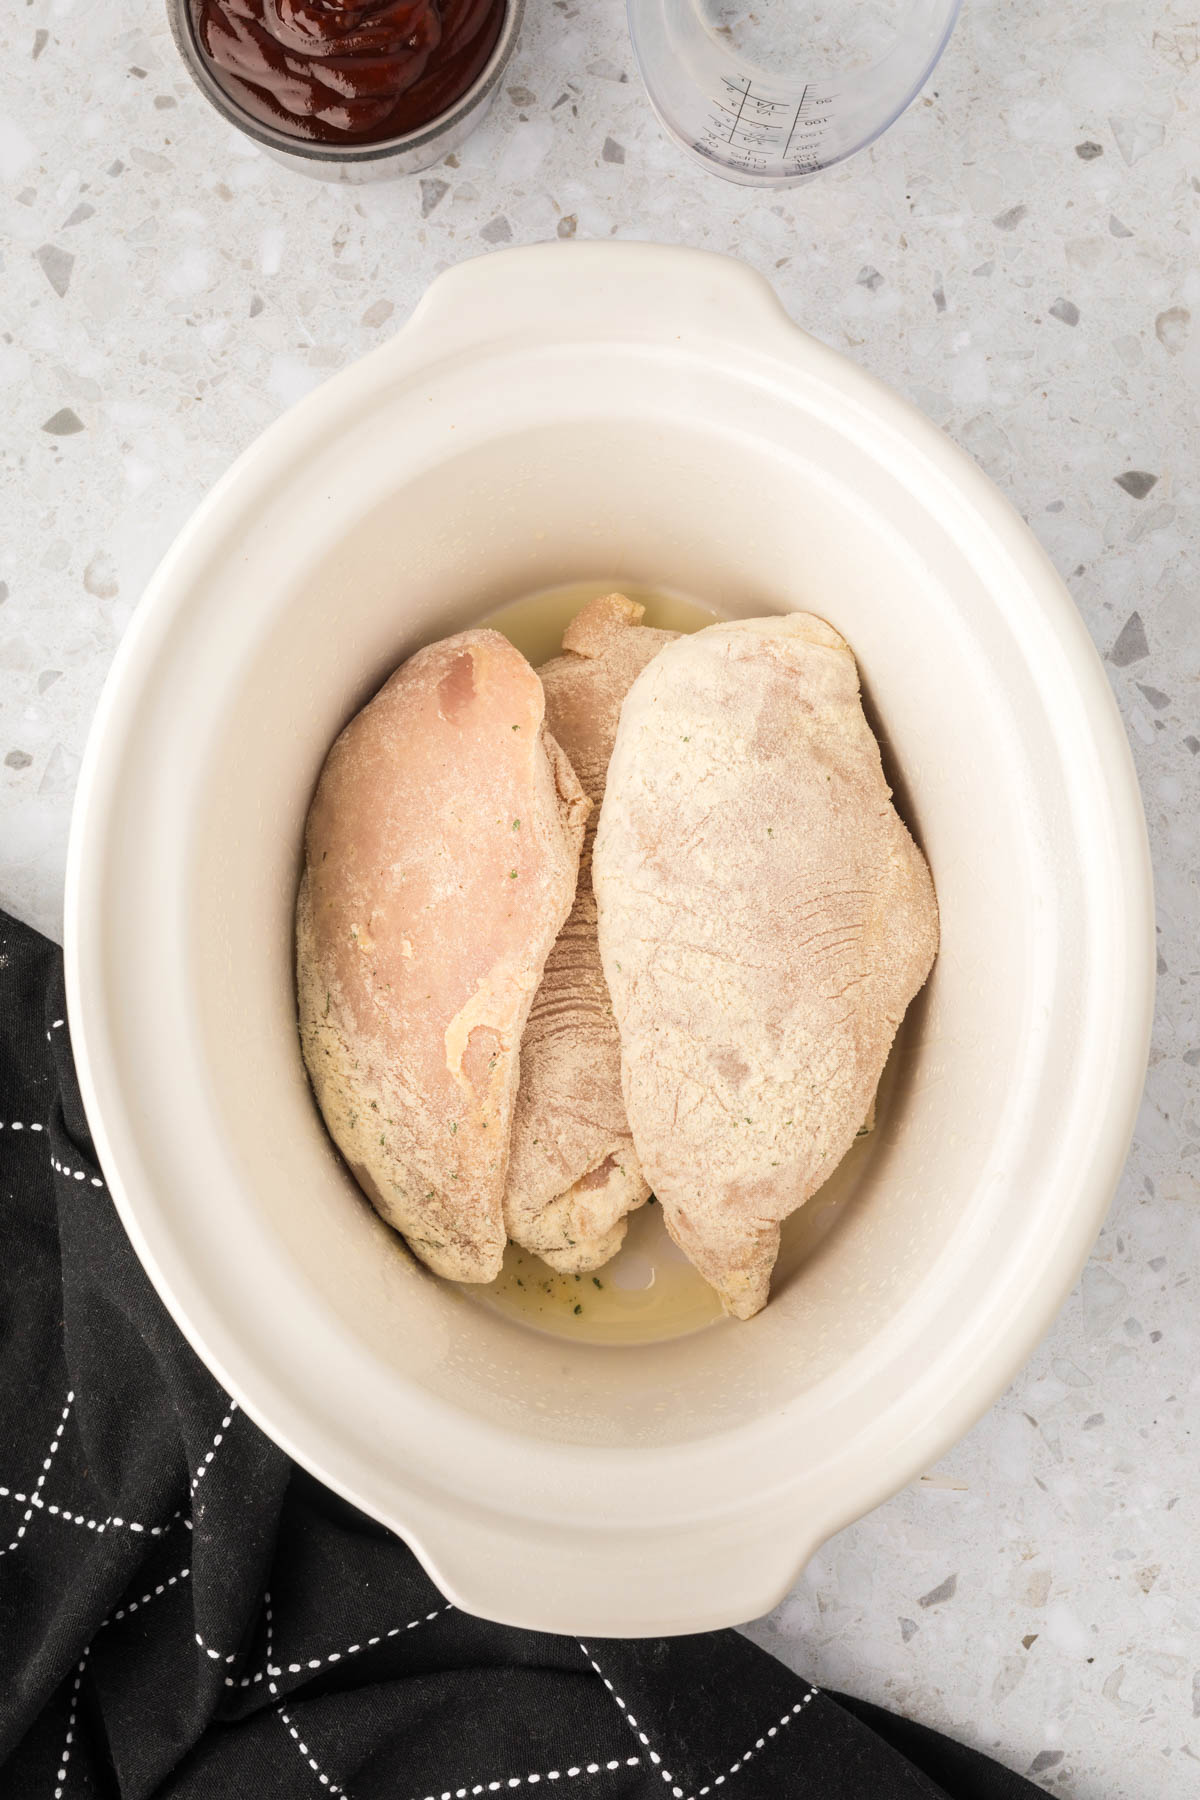 Placing seasoned chicken in the slow cooker